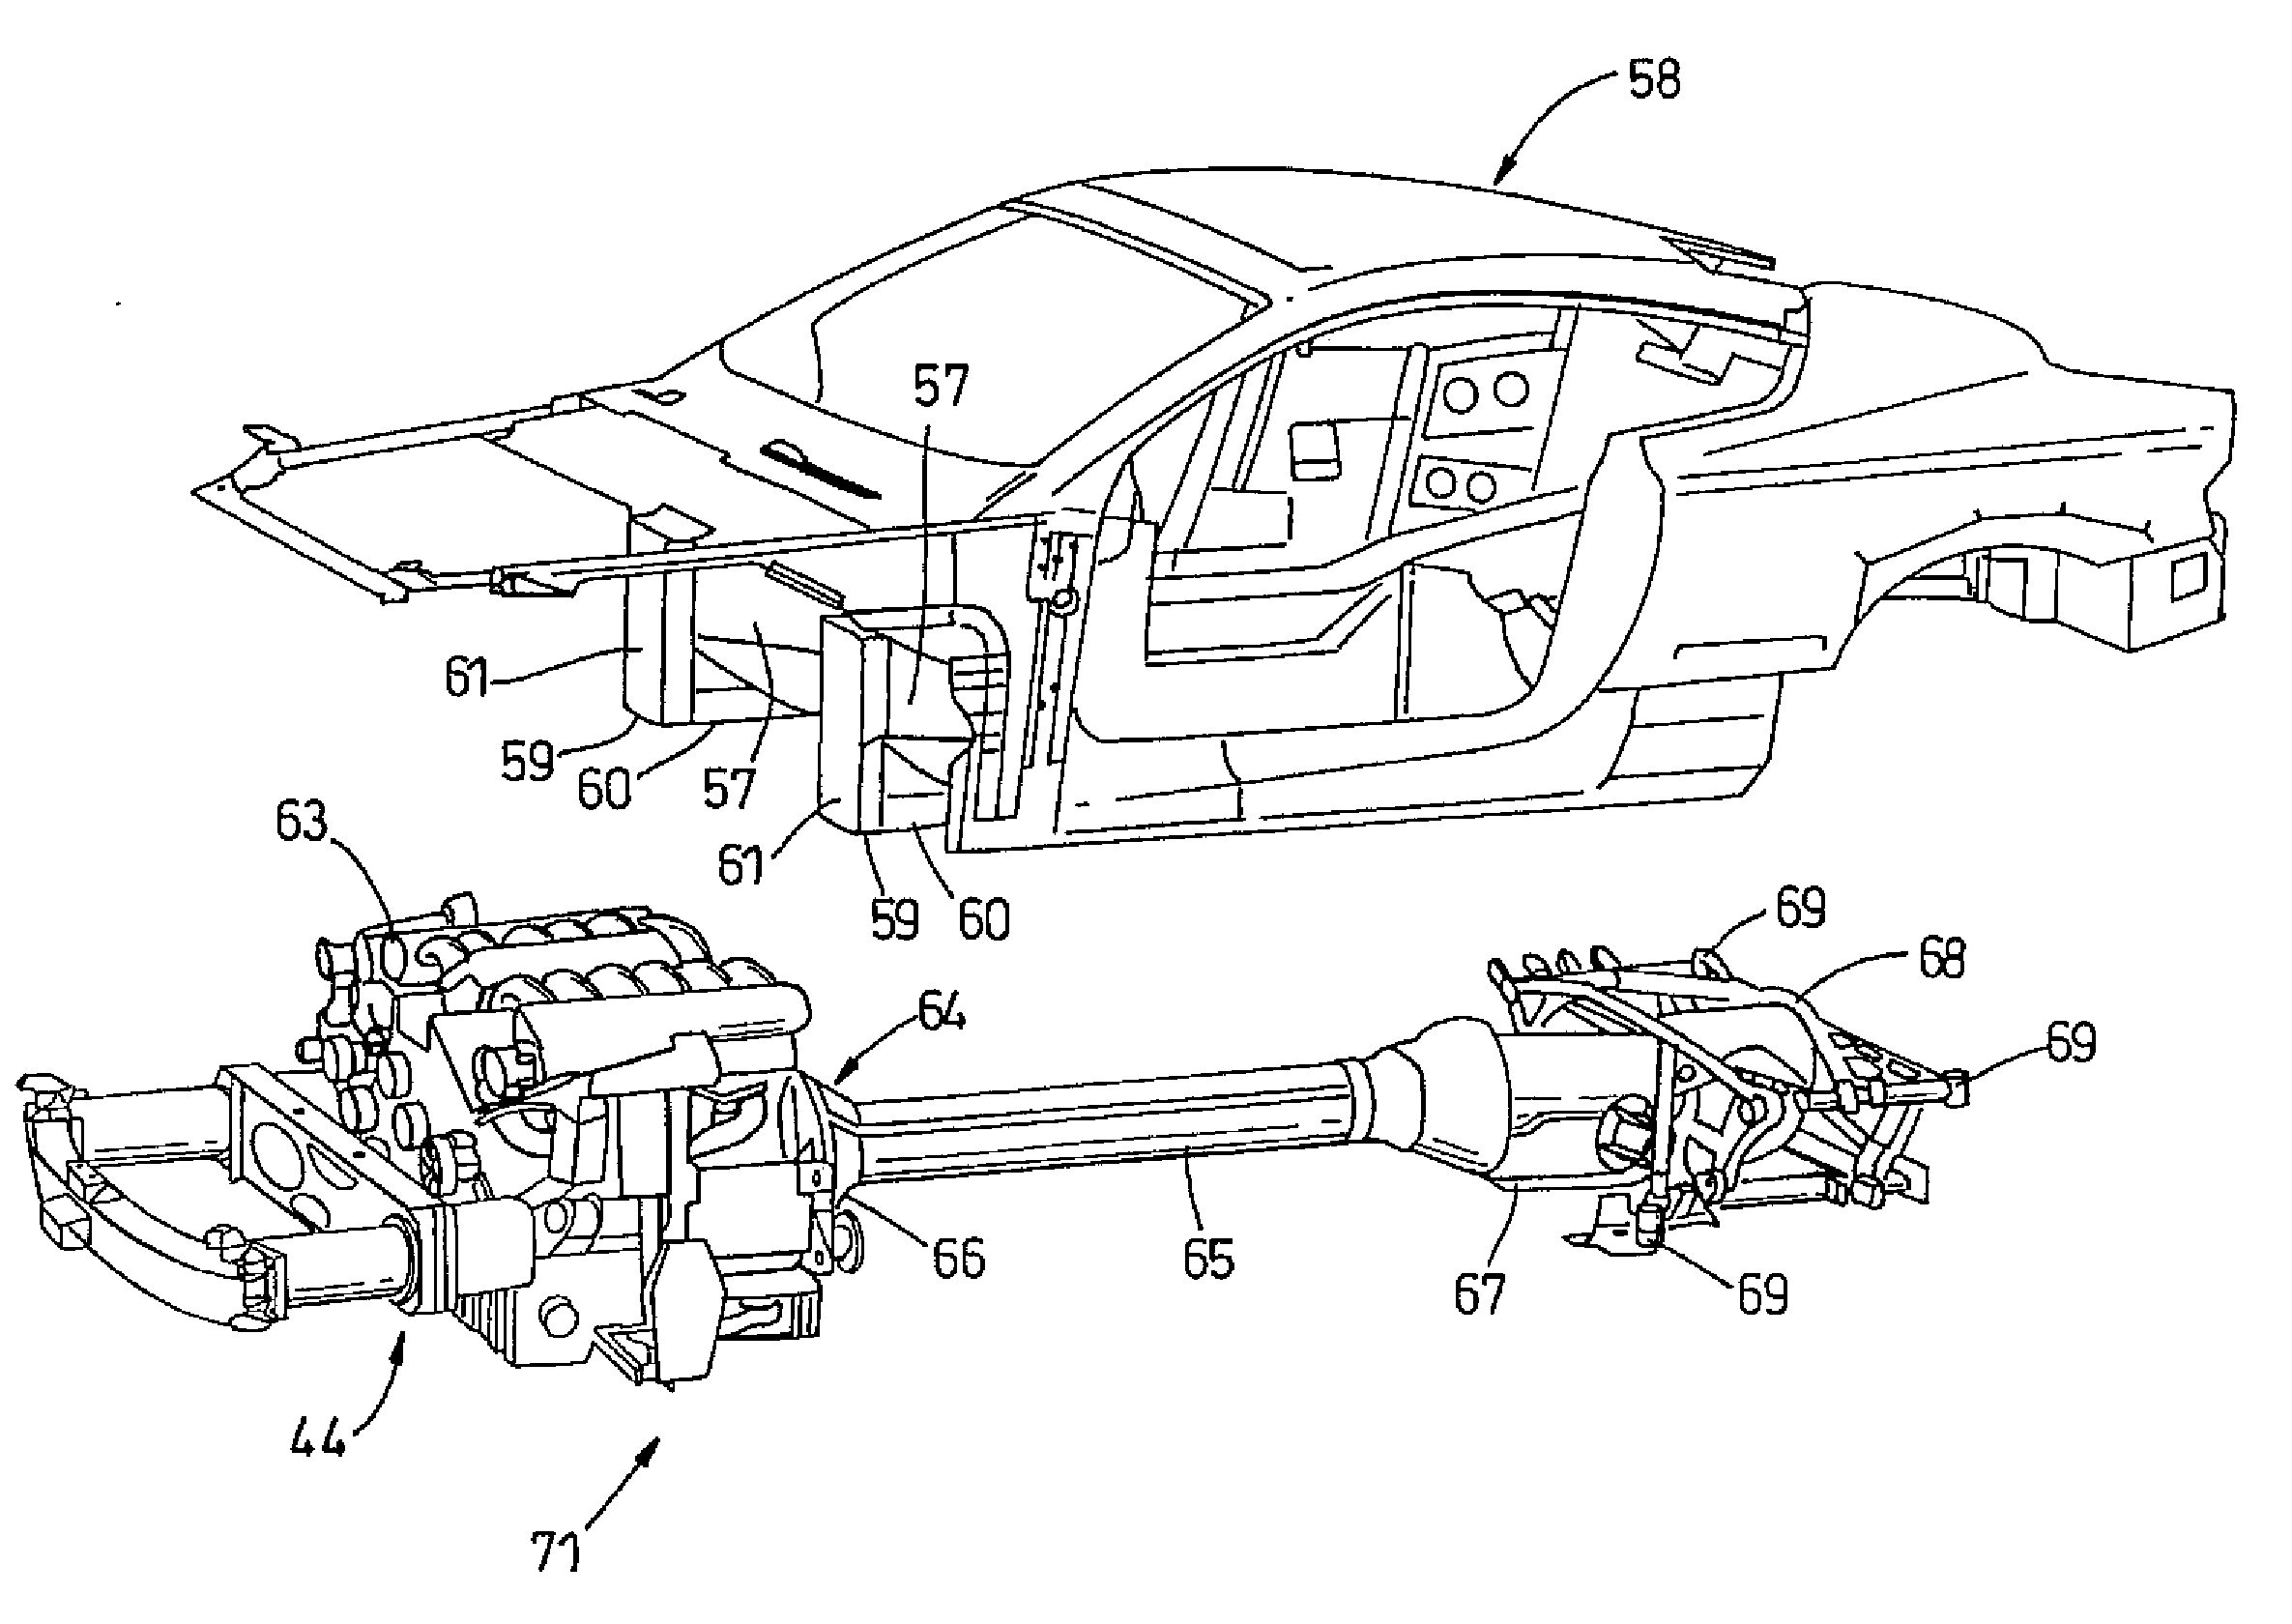 Assembly of a motor vehicle body and a power train and chassis module